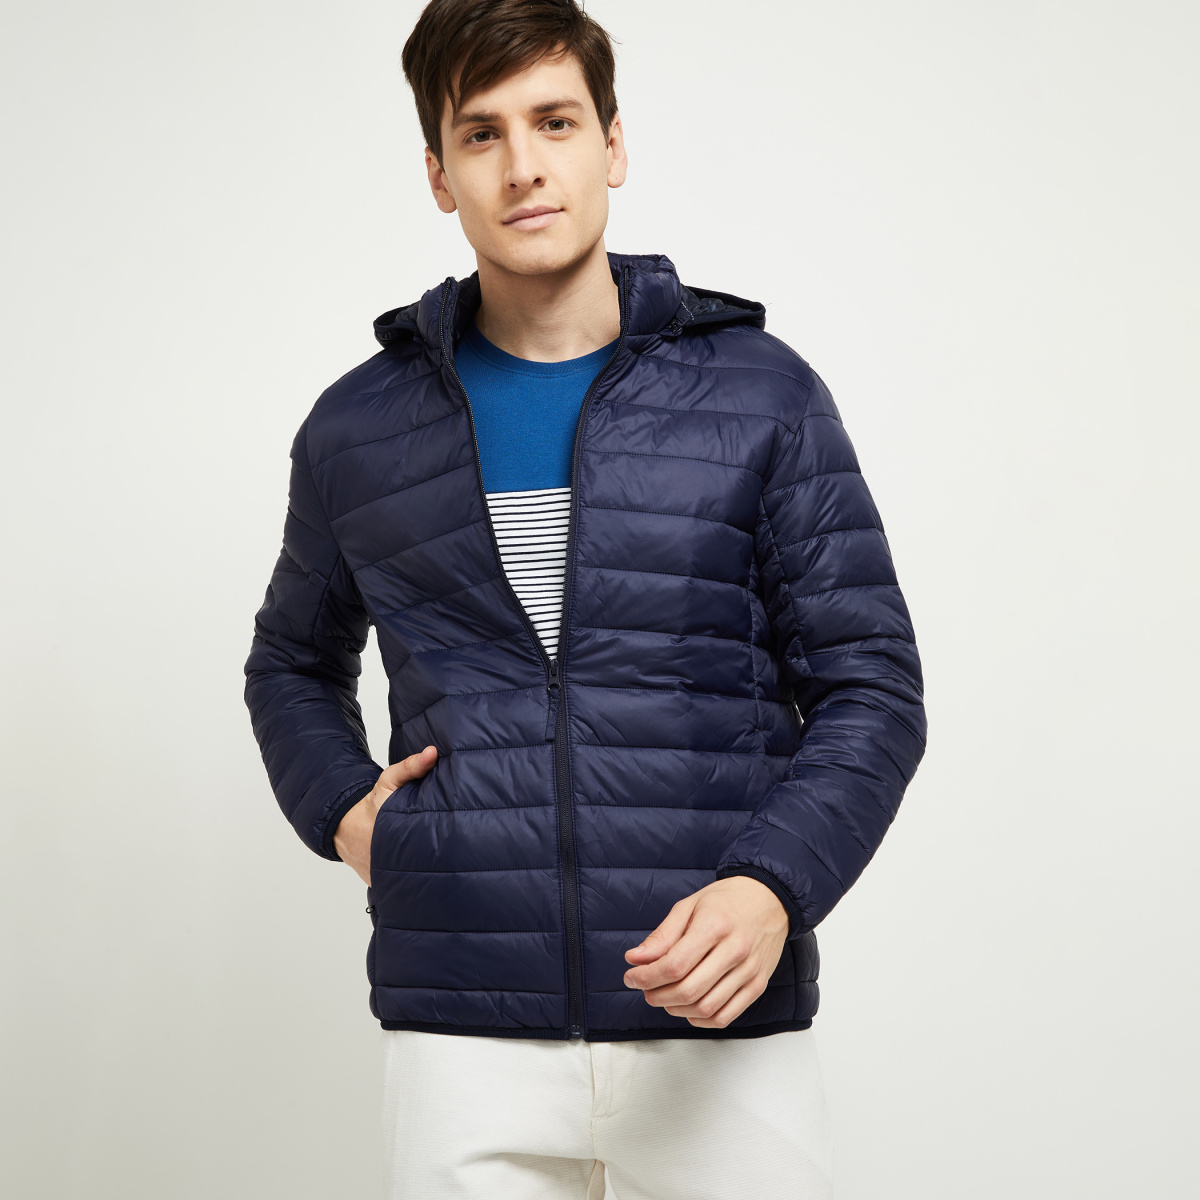 MAX Solid Hooded Puffer Jacket In a Bag